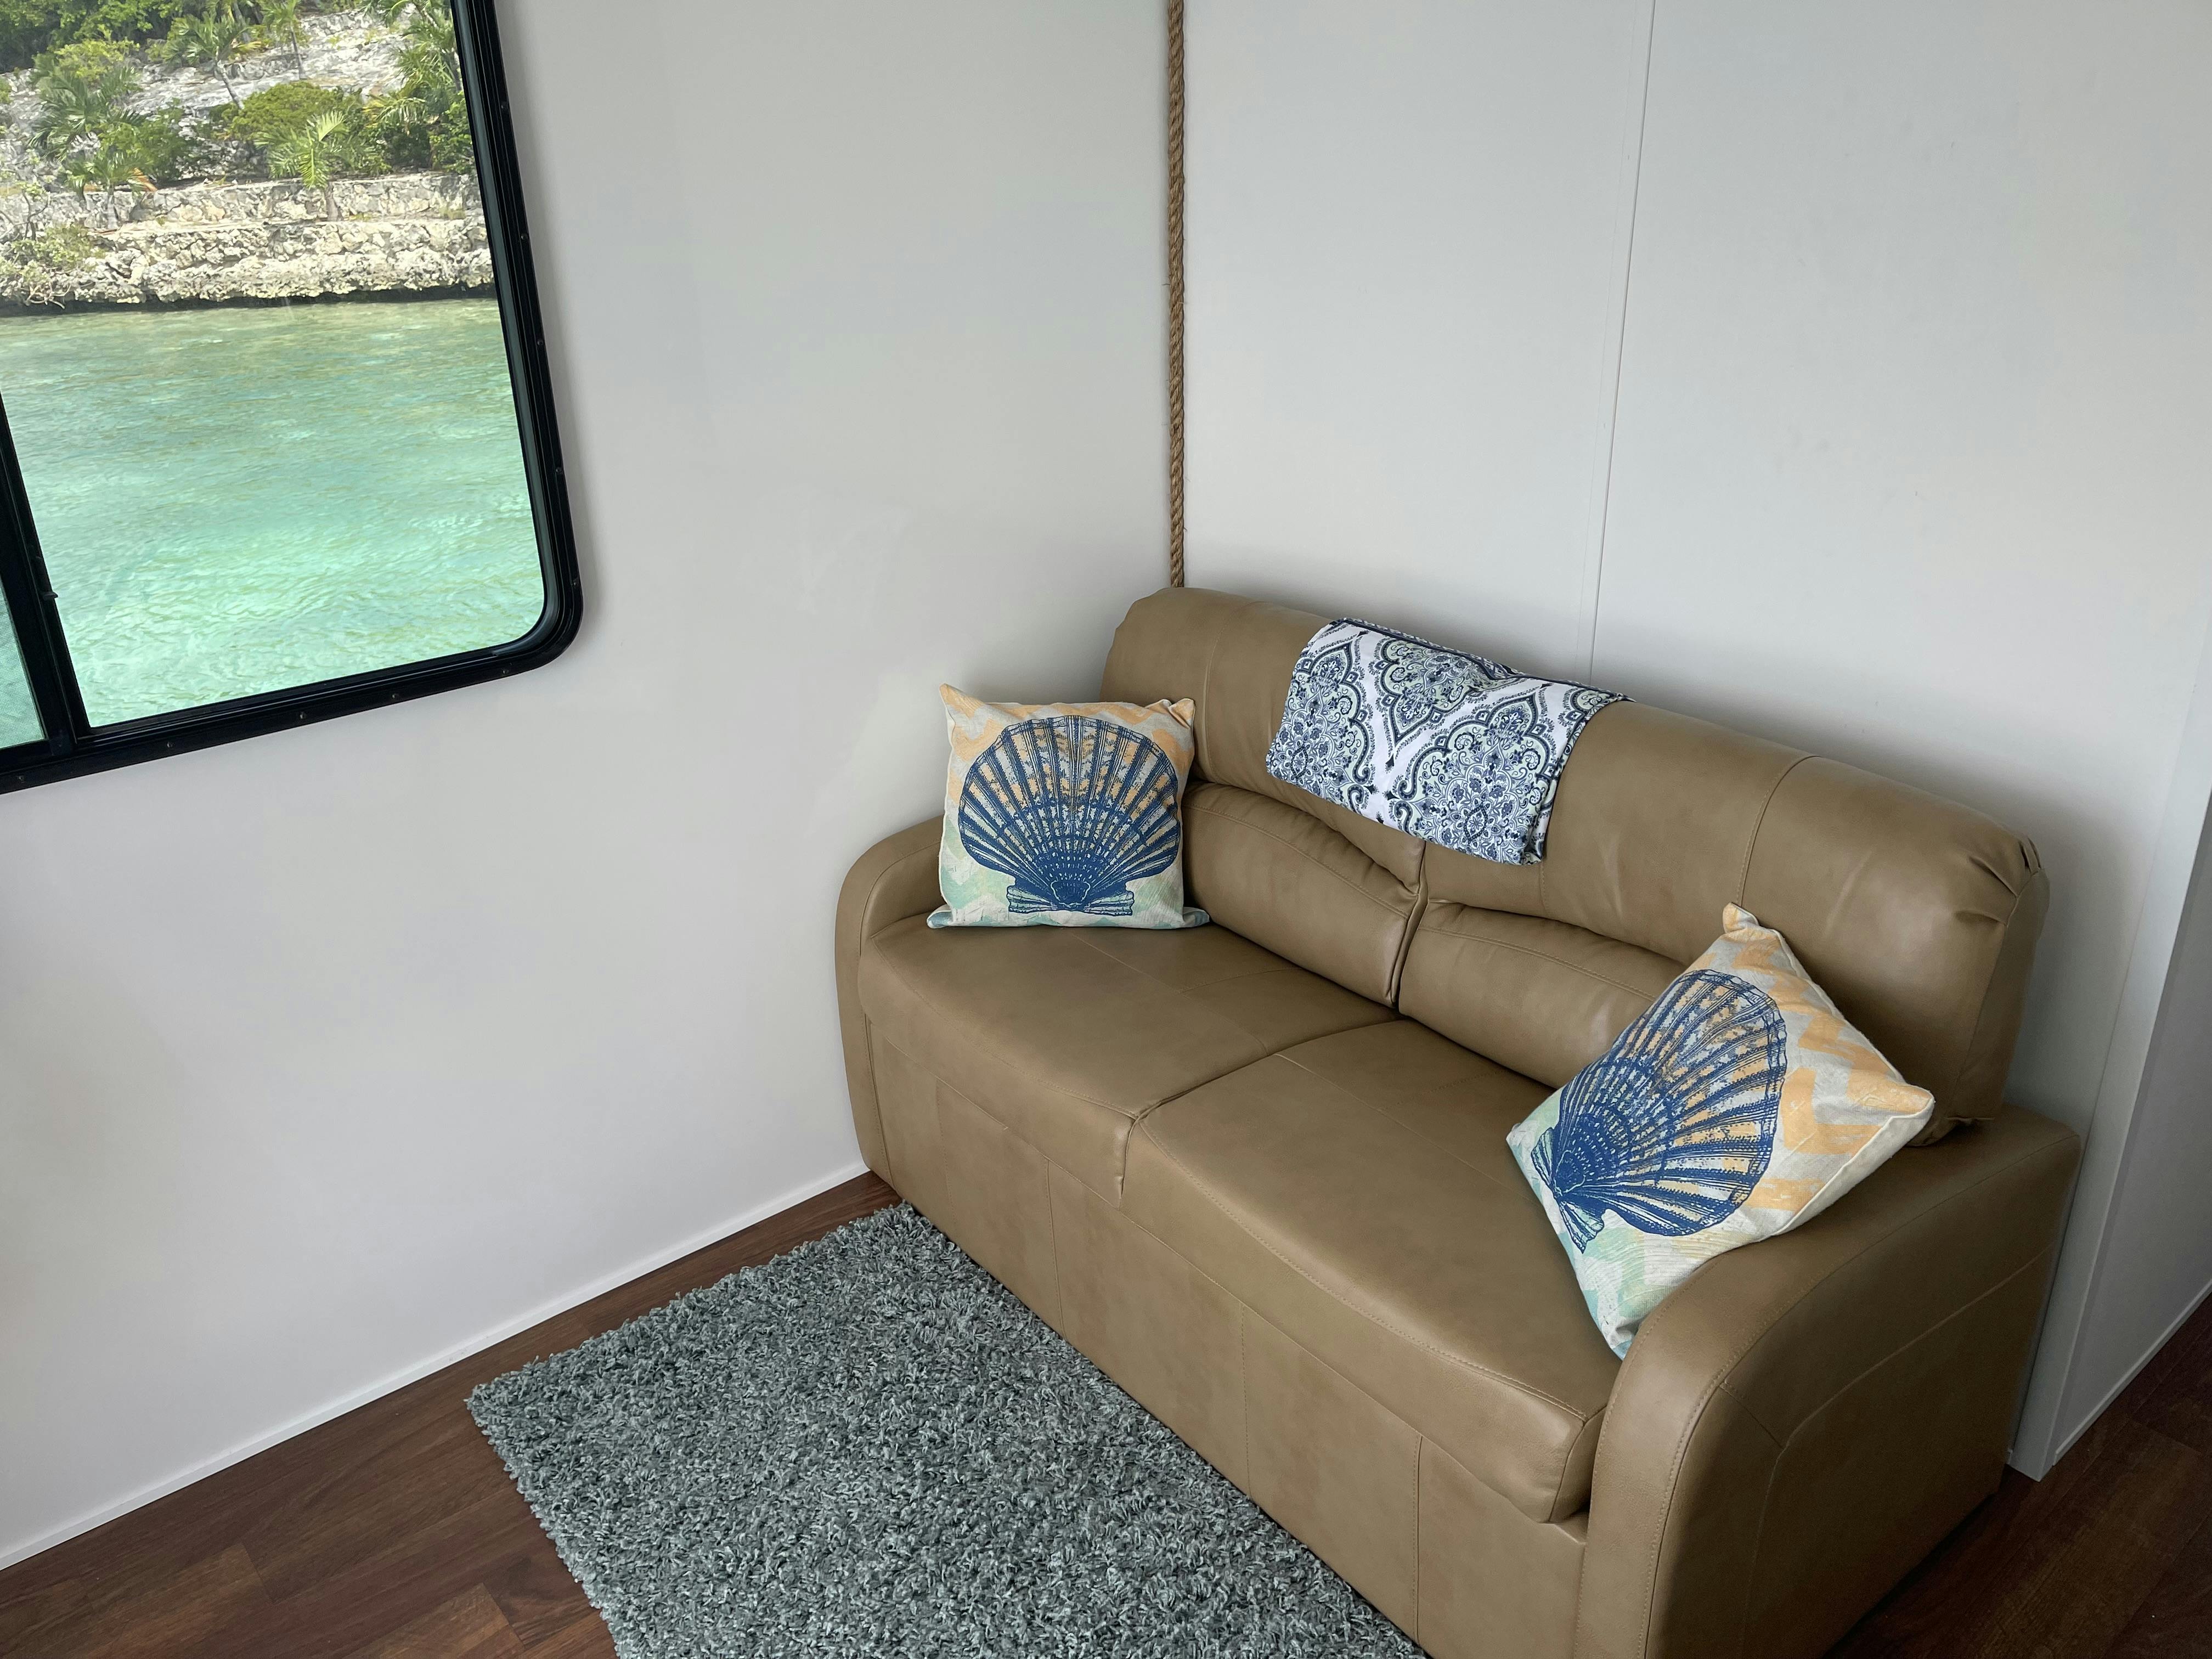 houseboat fold out sofa for the kids!